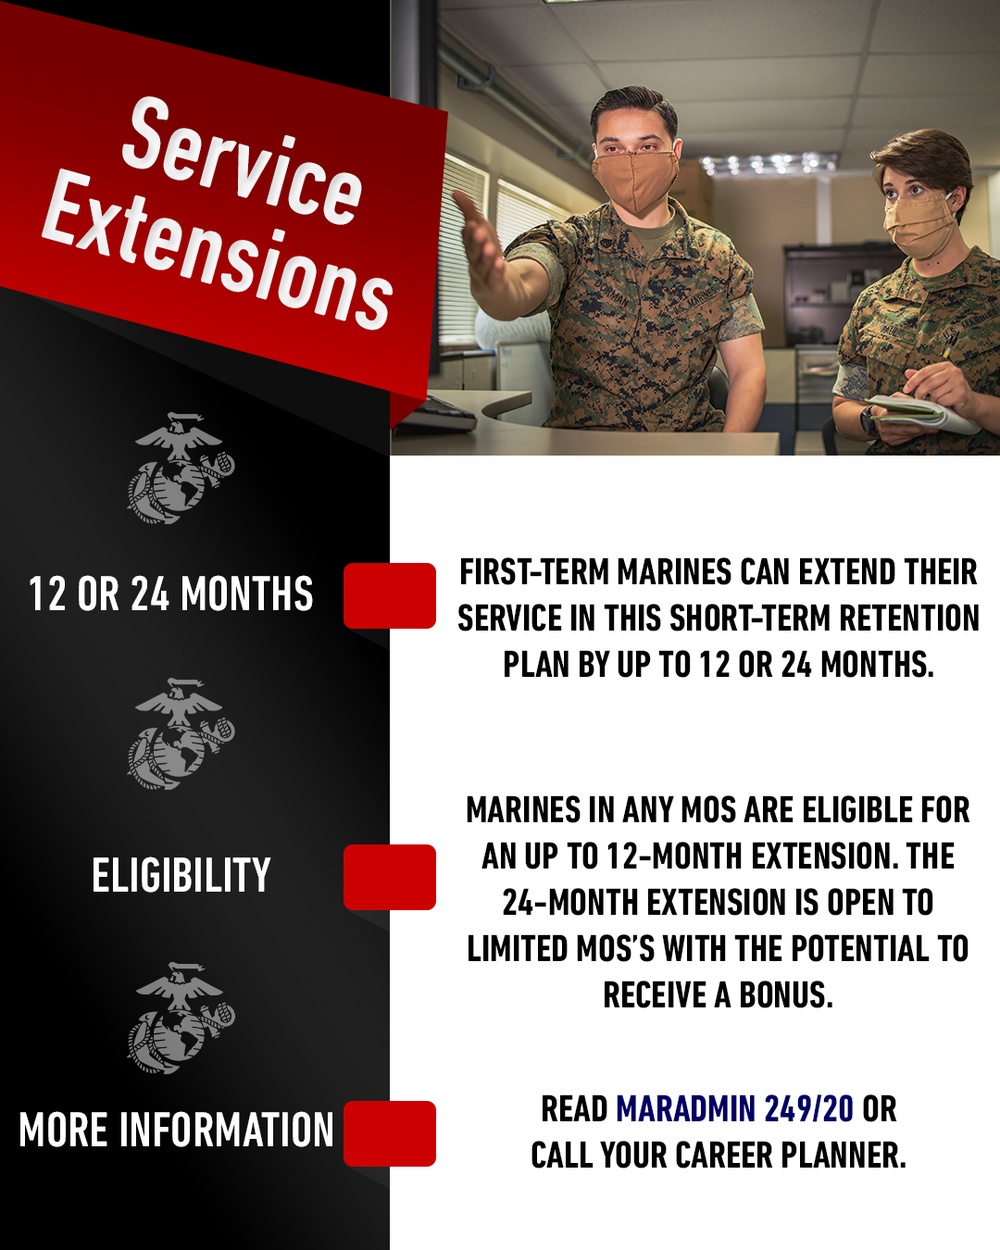 Service Extension